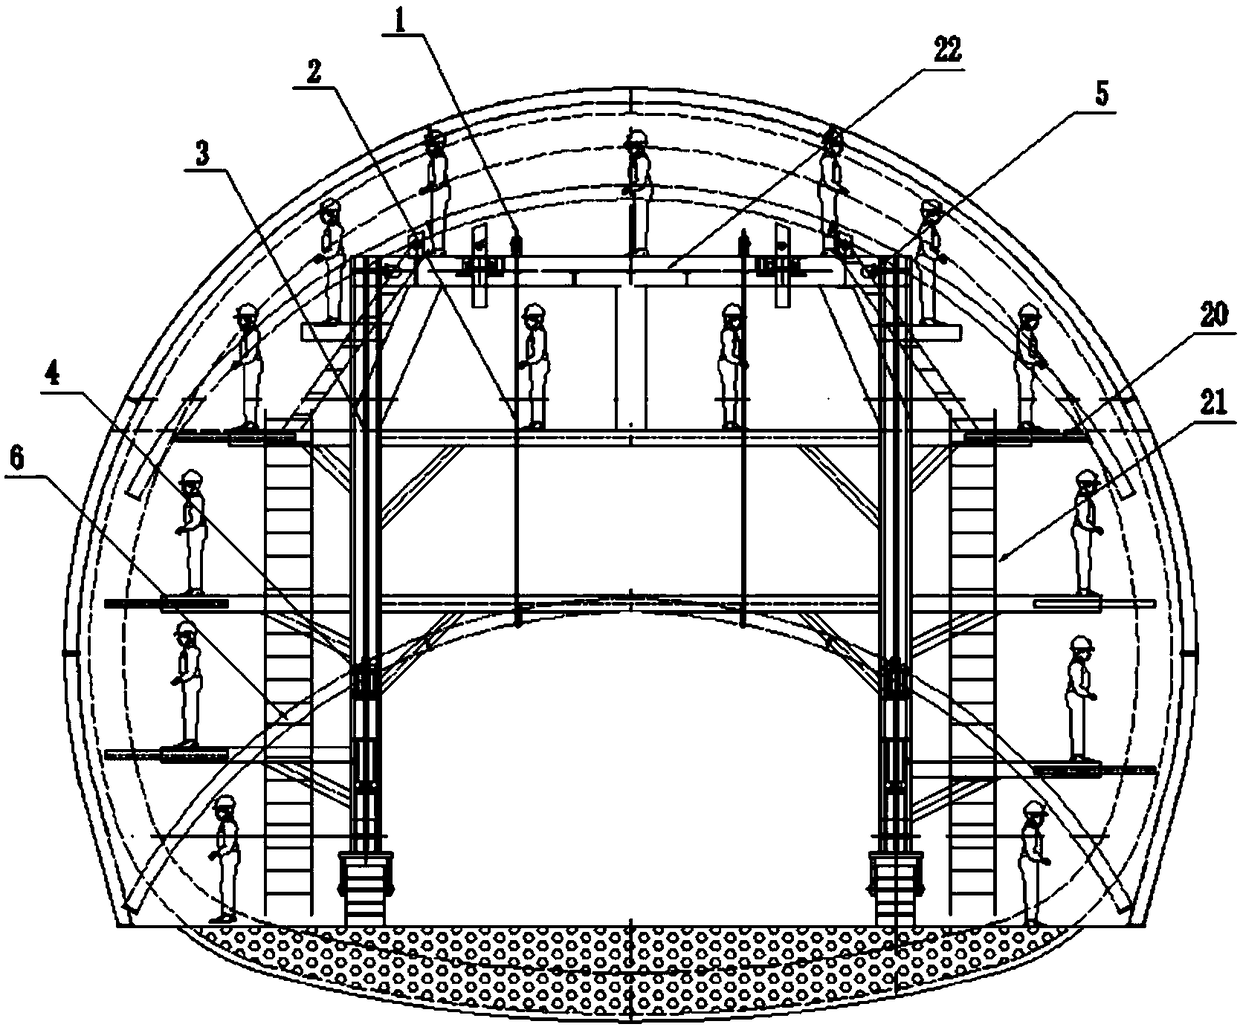 Steel arch trolley suitable for tunnel micro-step excavation method